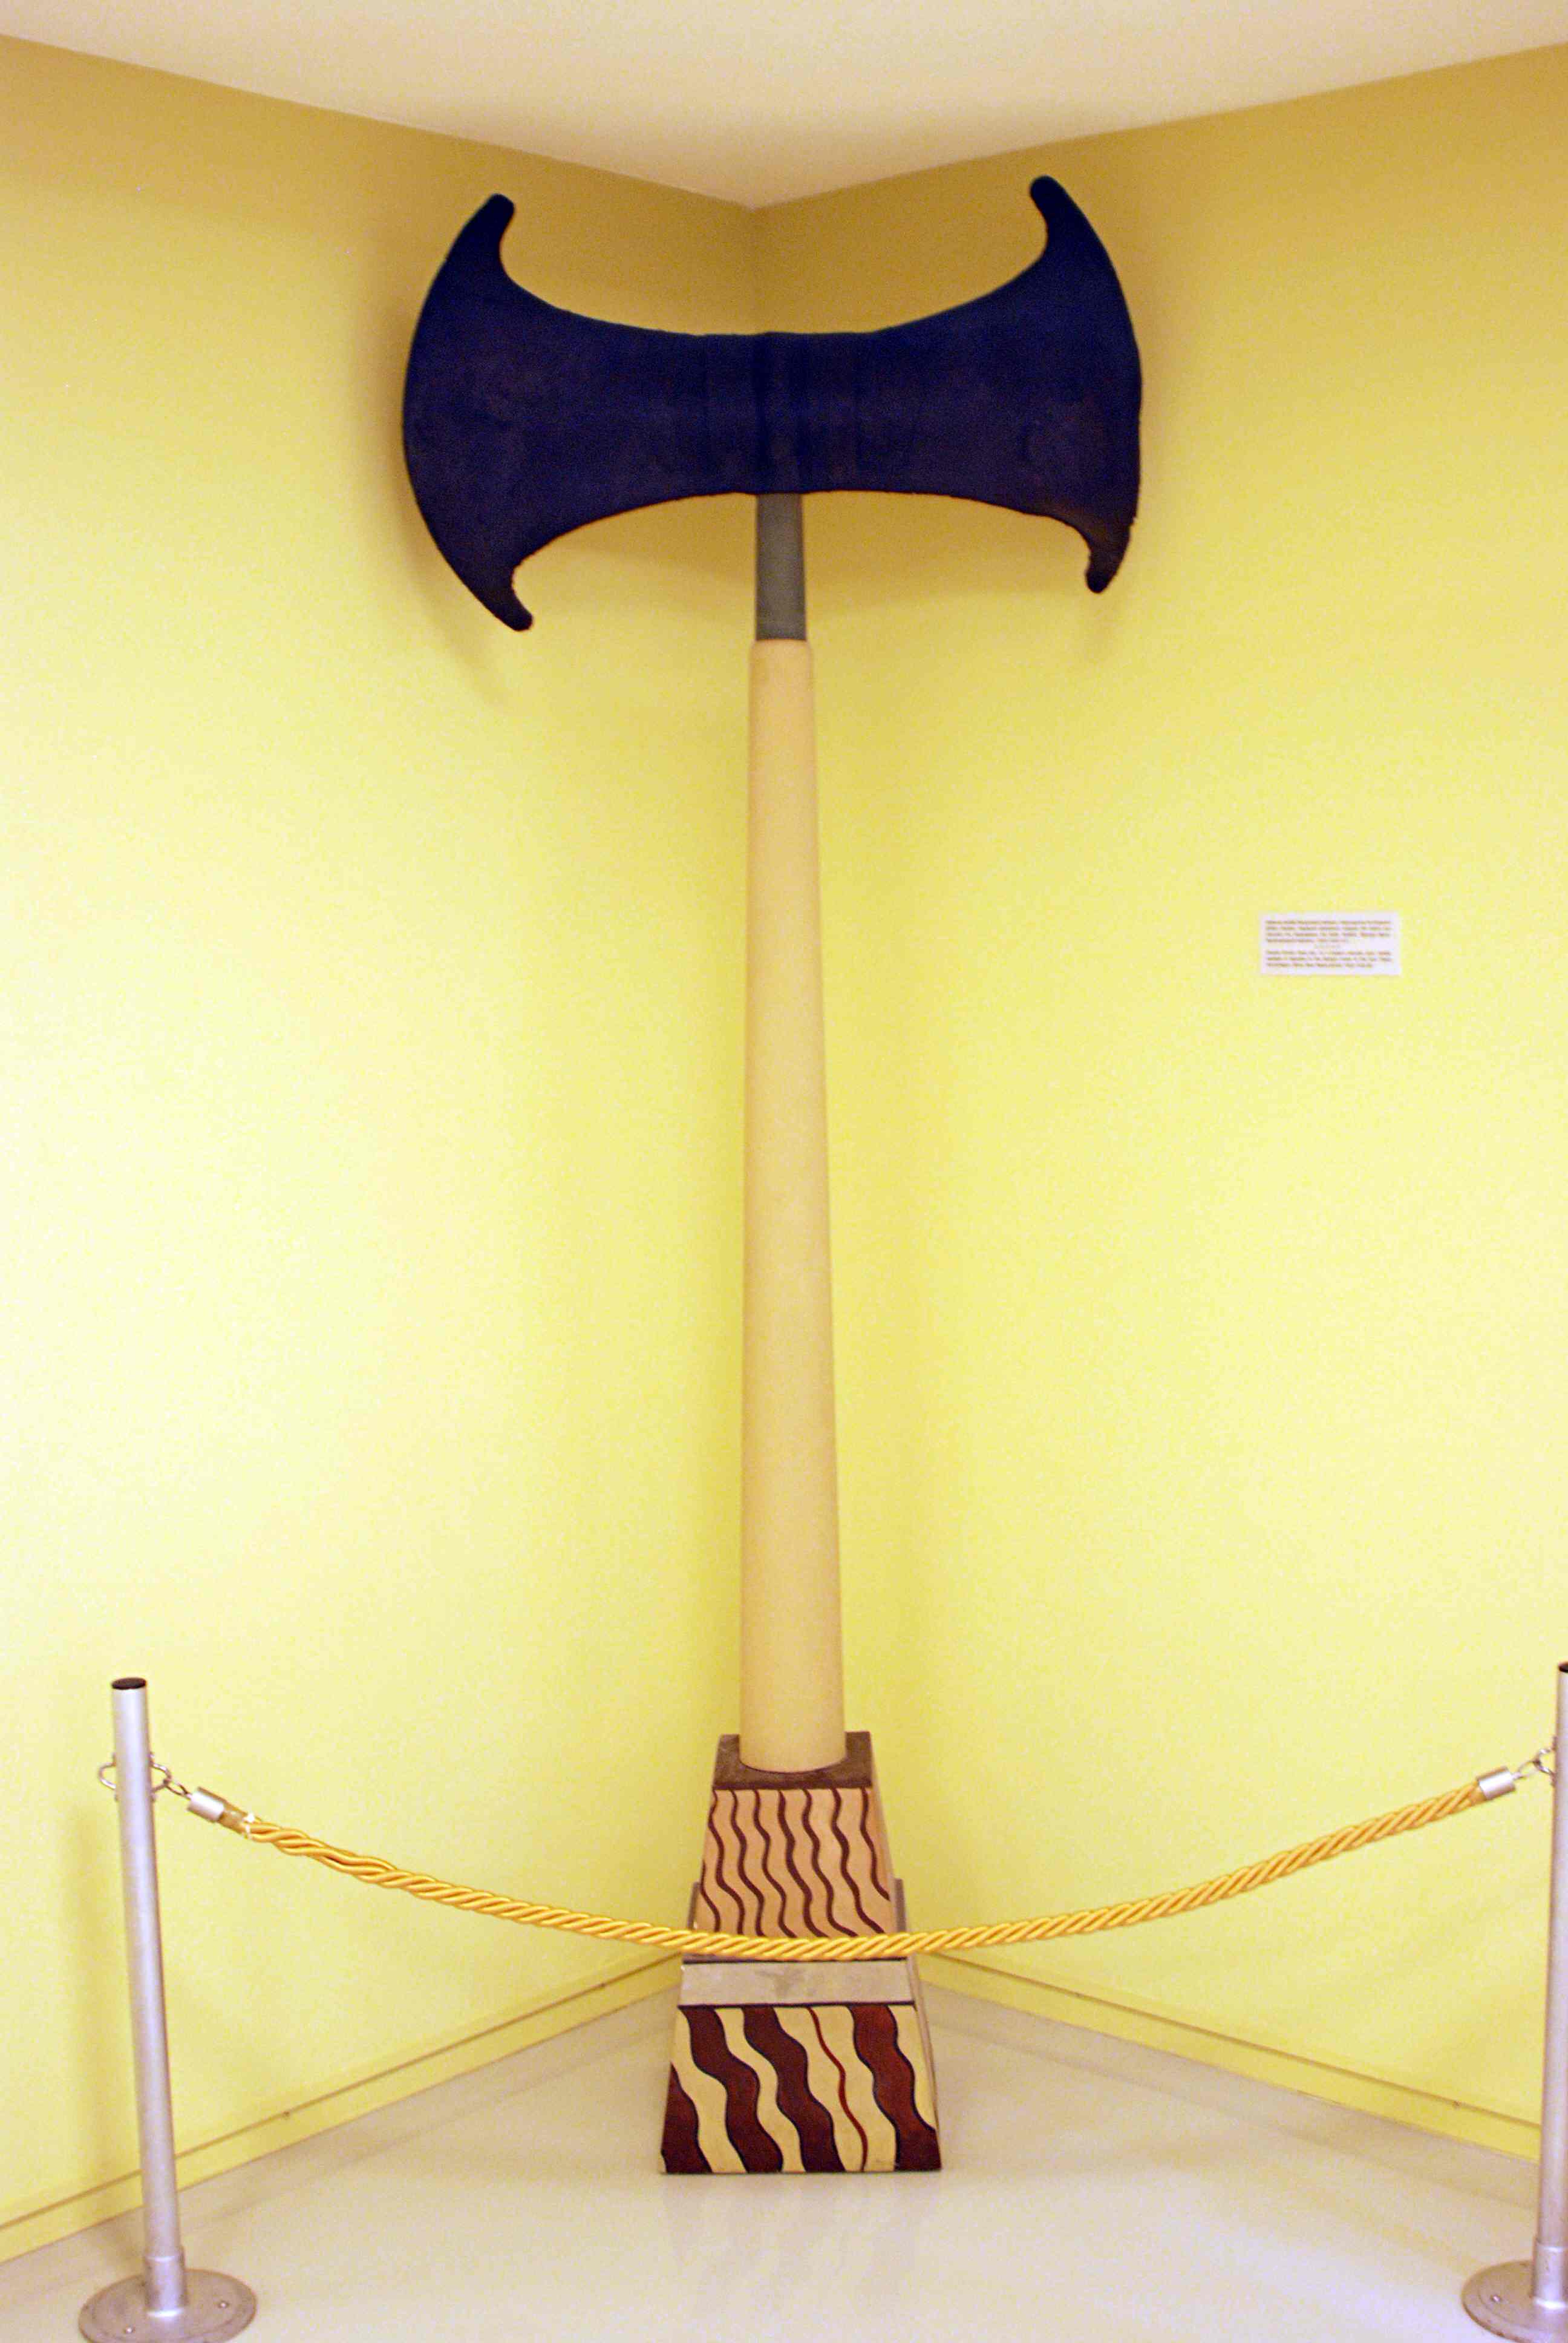 Giant ancient Minoan axes – what were they used for? 1